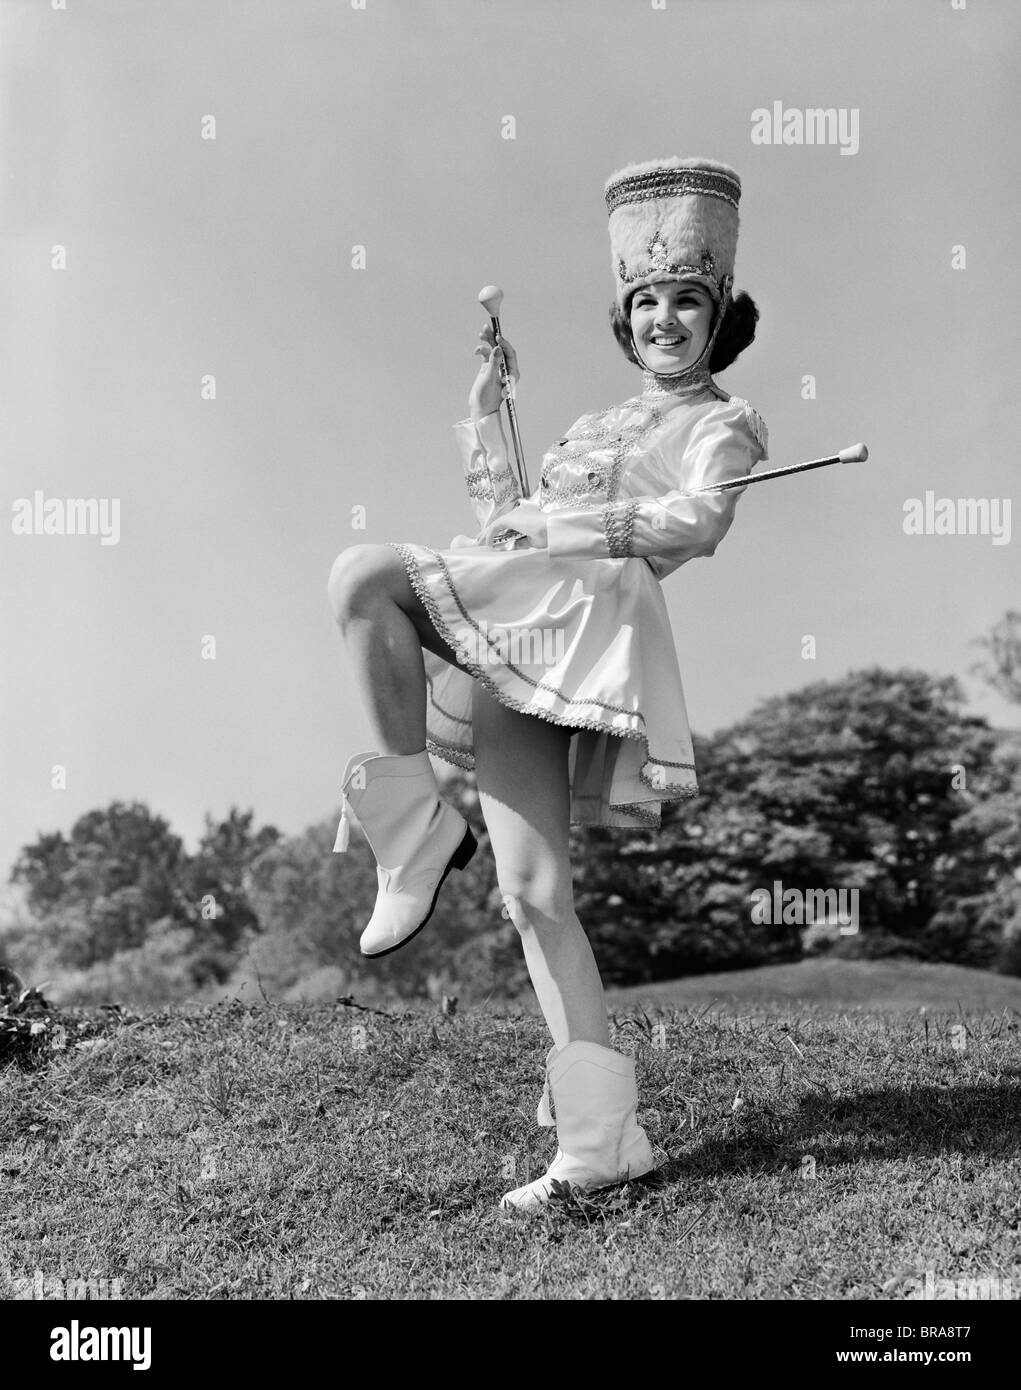 1960s SMILING MAJORETTE IN UNIFORM WITH SHORT SKIRT BOOTS TALL HAT AND TWO BATONS POSING OUTDOORS Stock Photo